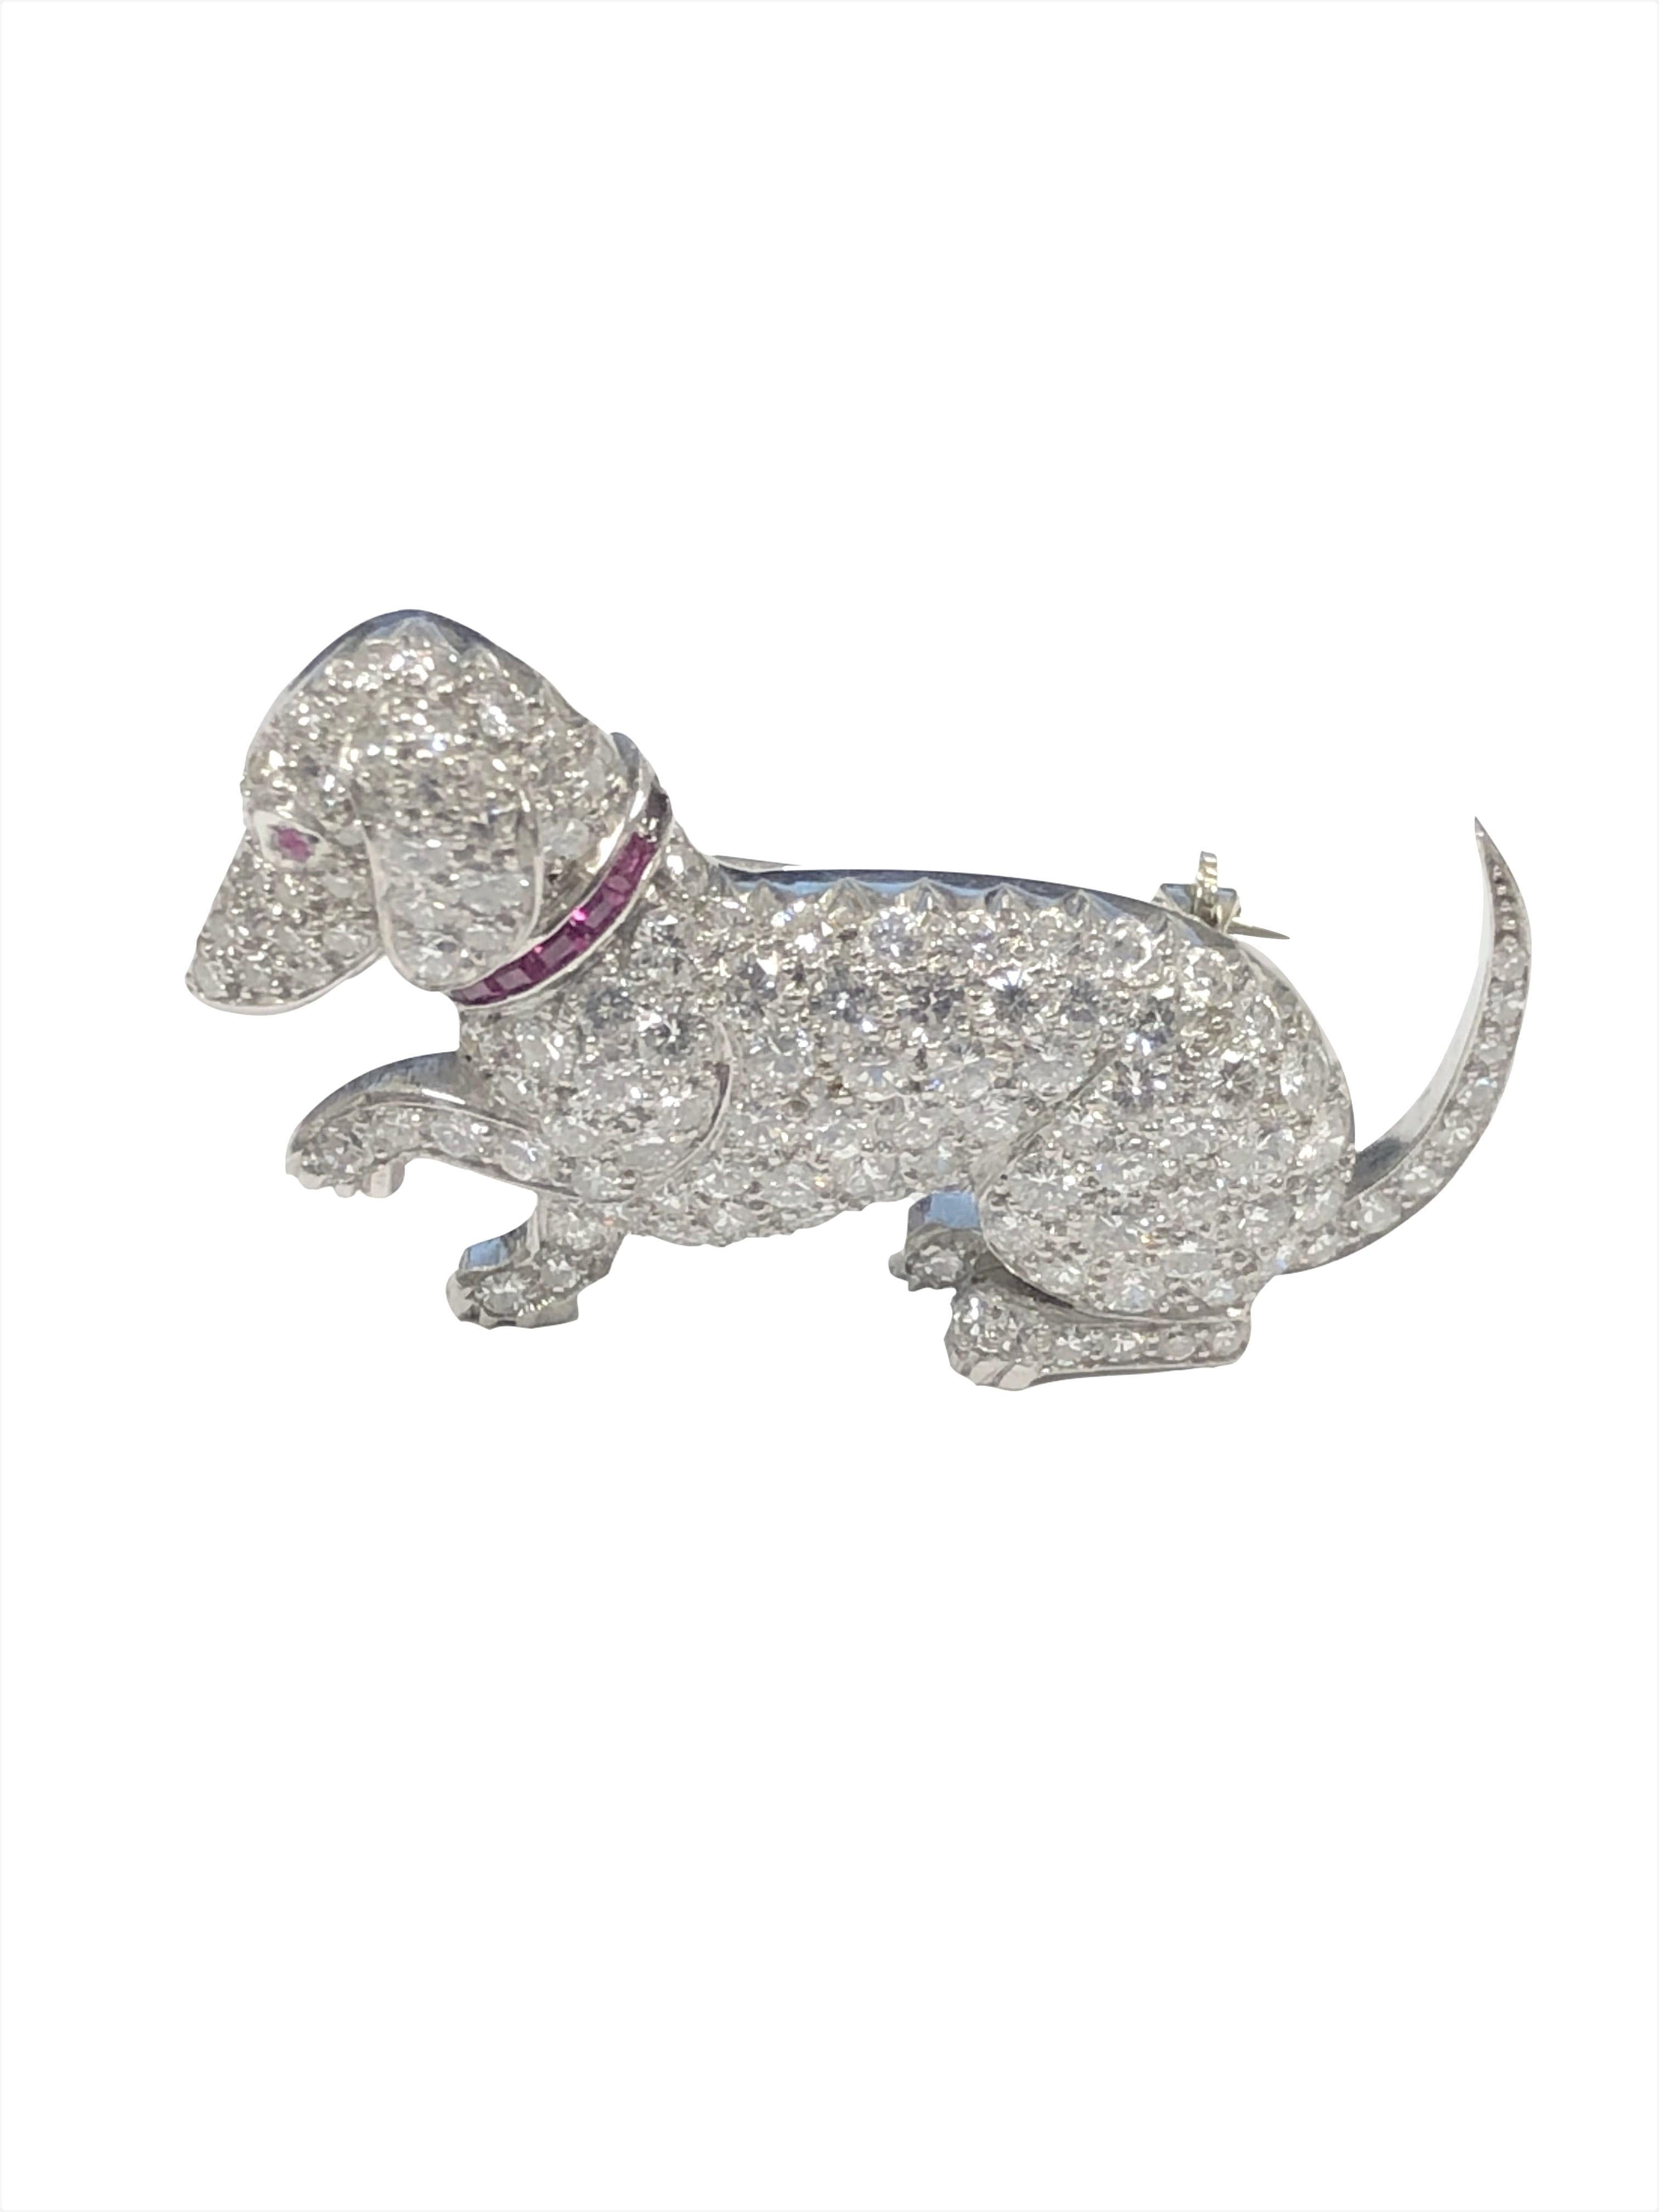 Circa 1930s Raymond C. Yard Platinum Dachshund Dog Brooch, measuring 1 3/8 inch in length X 3/4 inch. Set with Fine White Transitional cut Diamonds totaling 3 1/2 Carats. Further set with Baguette Rubies forming a Dog Collar and a Ruby set Eye.